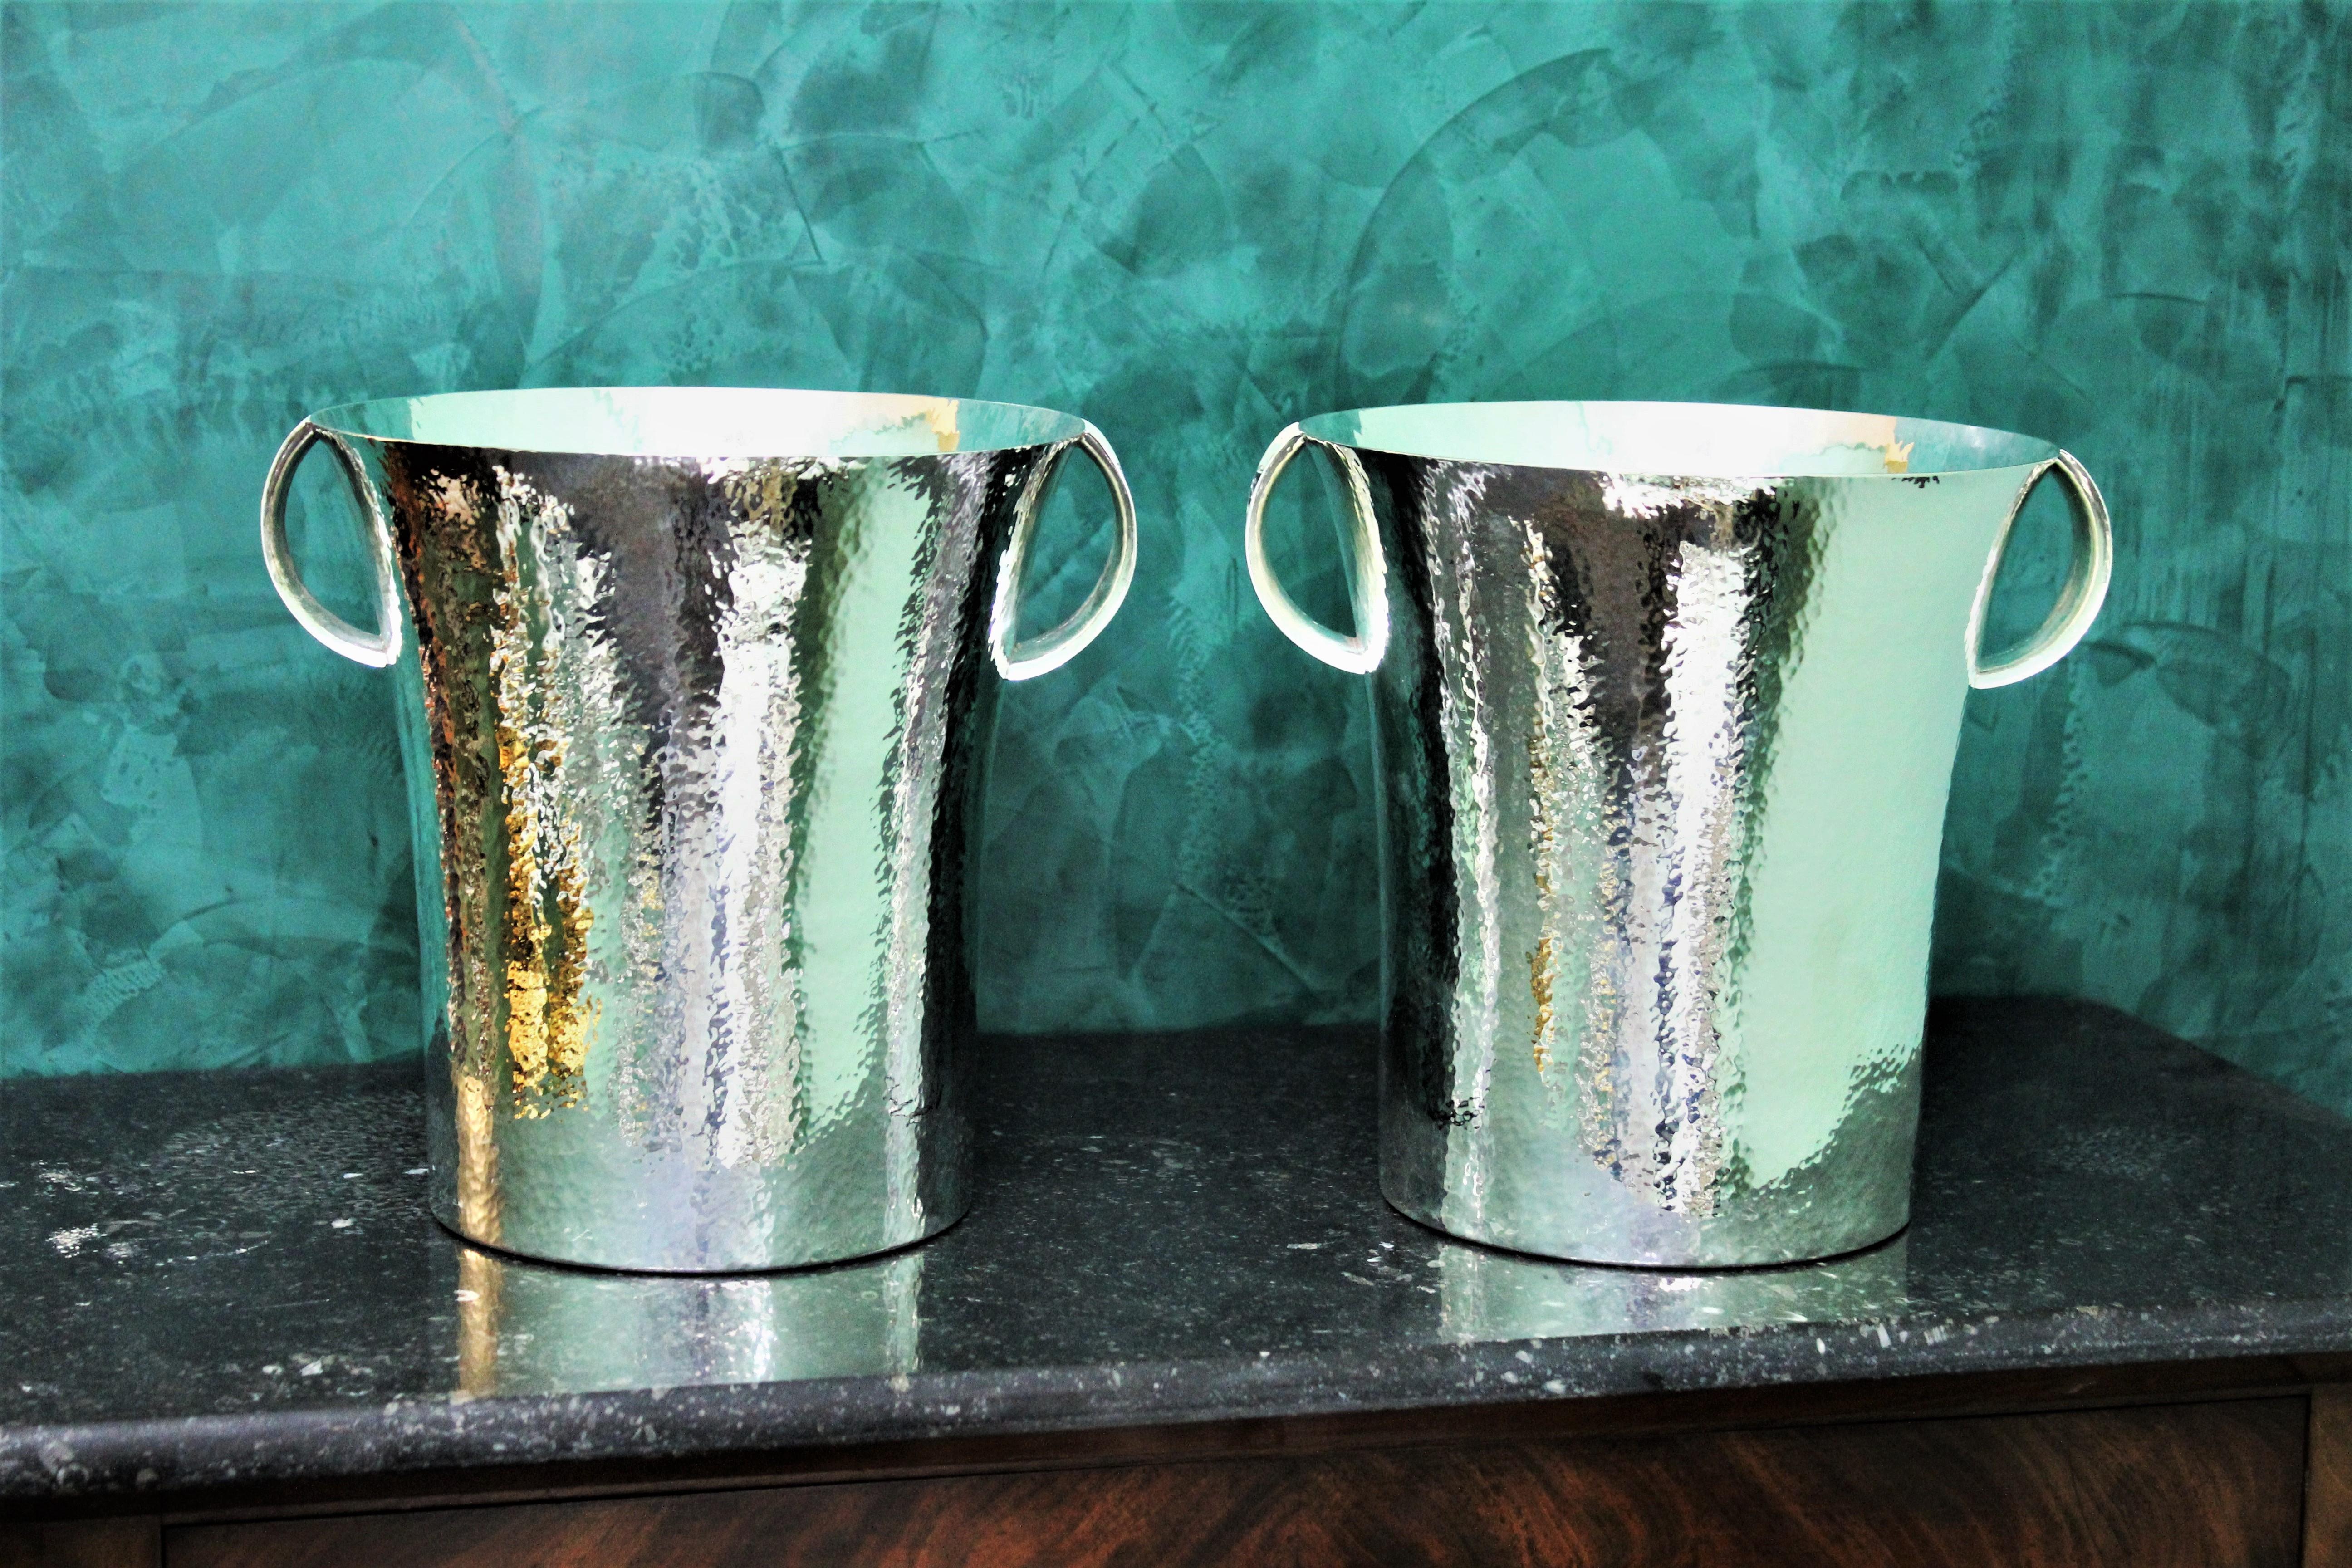 Pair of art decò silver wine coolers realized on commission between 1934 and 1944 in Italy by the silversmith Paolo Scavia for a local family. 
Silver 800/1000 mark and manufacturer mark and fasciscm period mark (1934-1944)
Handcrafted and